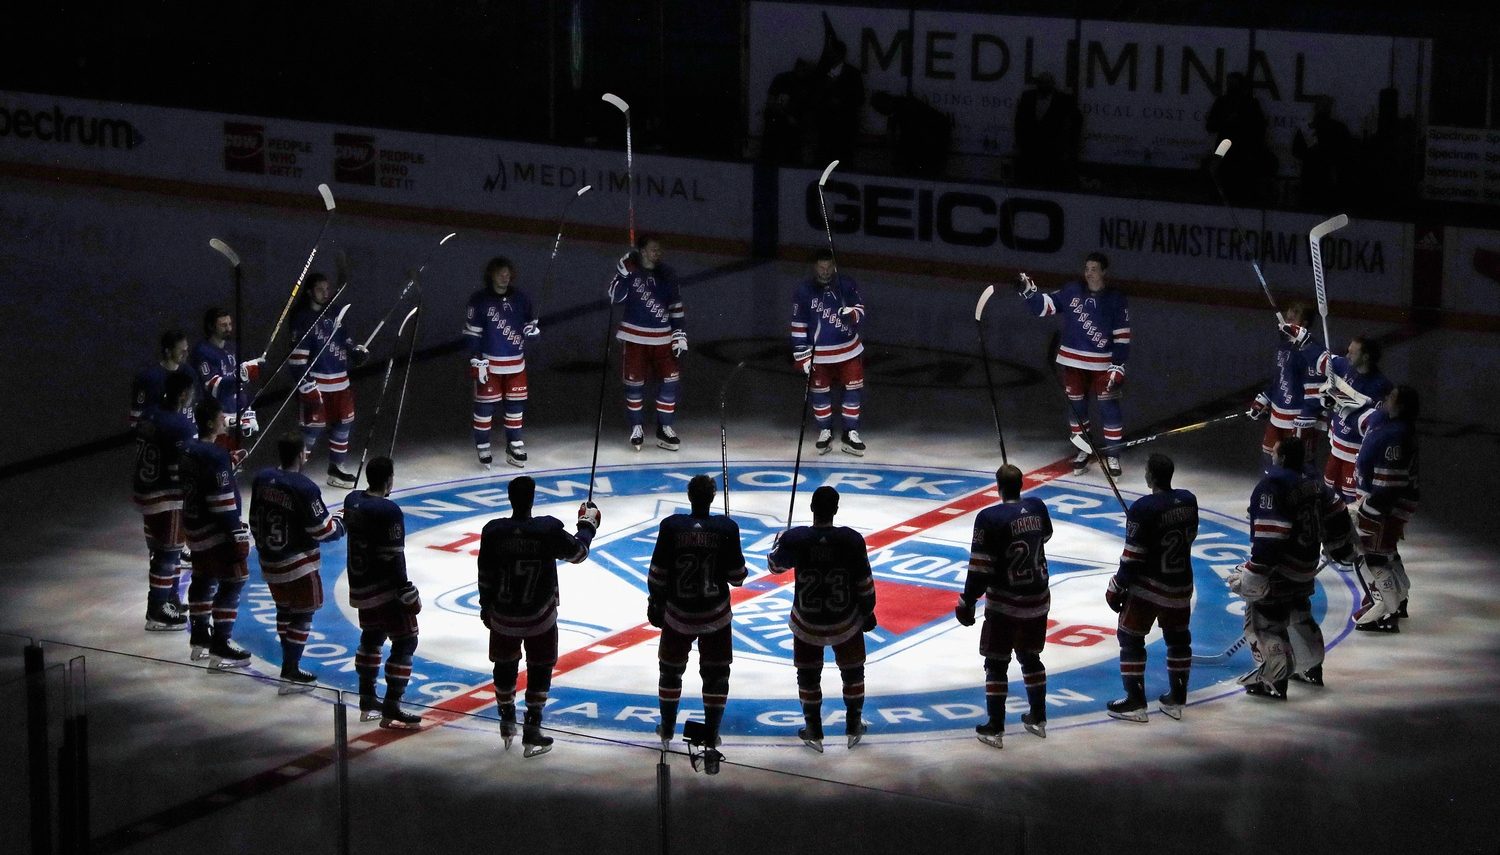 New York Rangers players huddle around the center ice logo as they prepare for the home opener against the New York Islanders at Madison Square Garden.